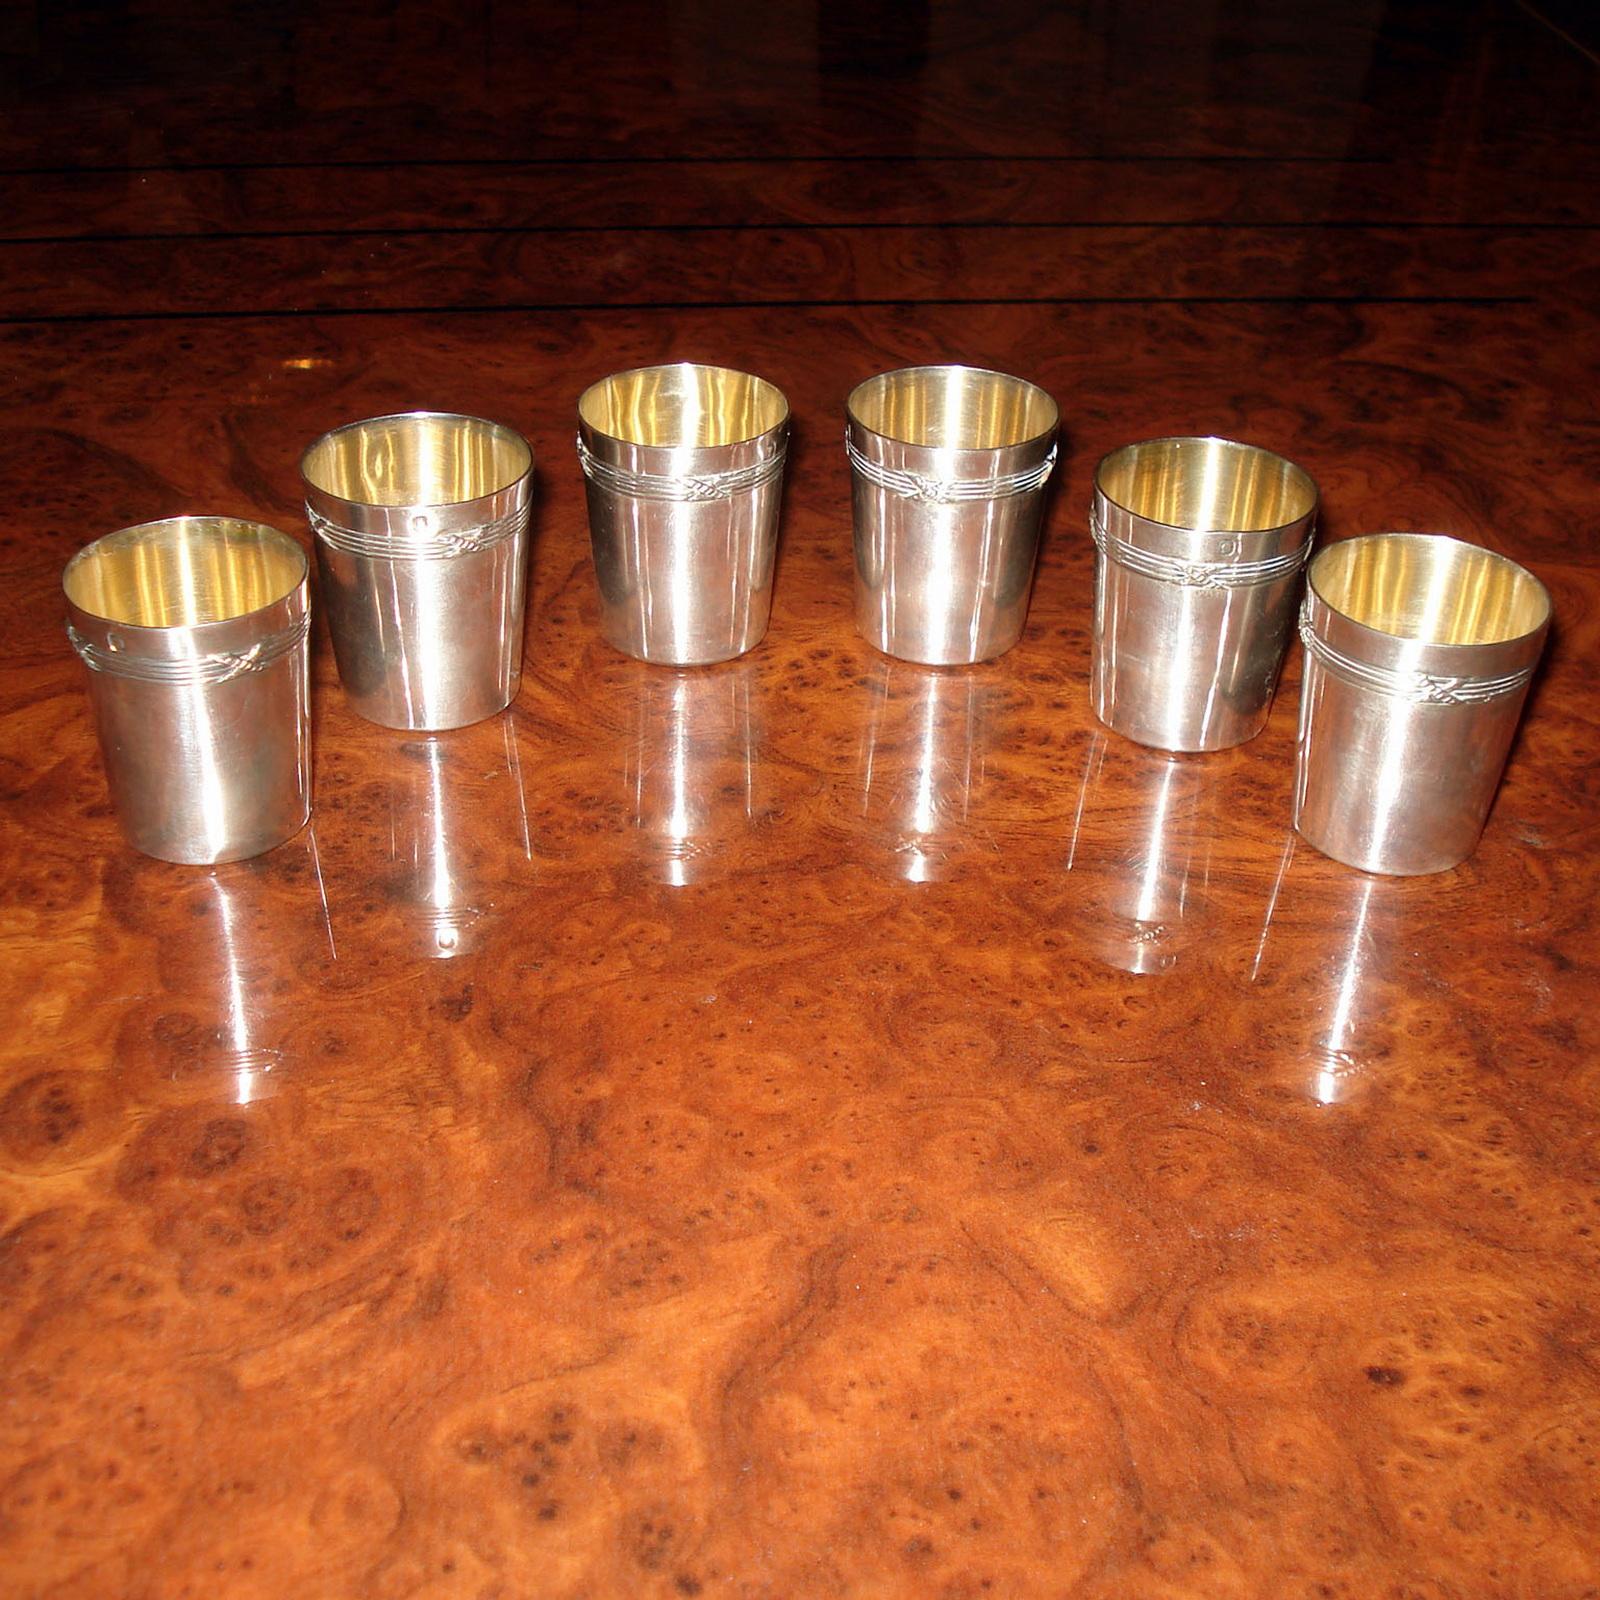 Art Nouveau French silver beakers by Edouard Fournemet.
Set of six liqueur cups in silver and vermeil, decorated with nets surmounted by crossed ribbons. Made by the renowned French silversmith Edouard Fournemet.
Marked on the wall with the French